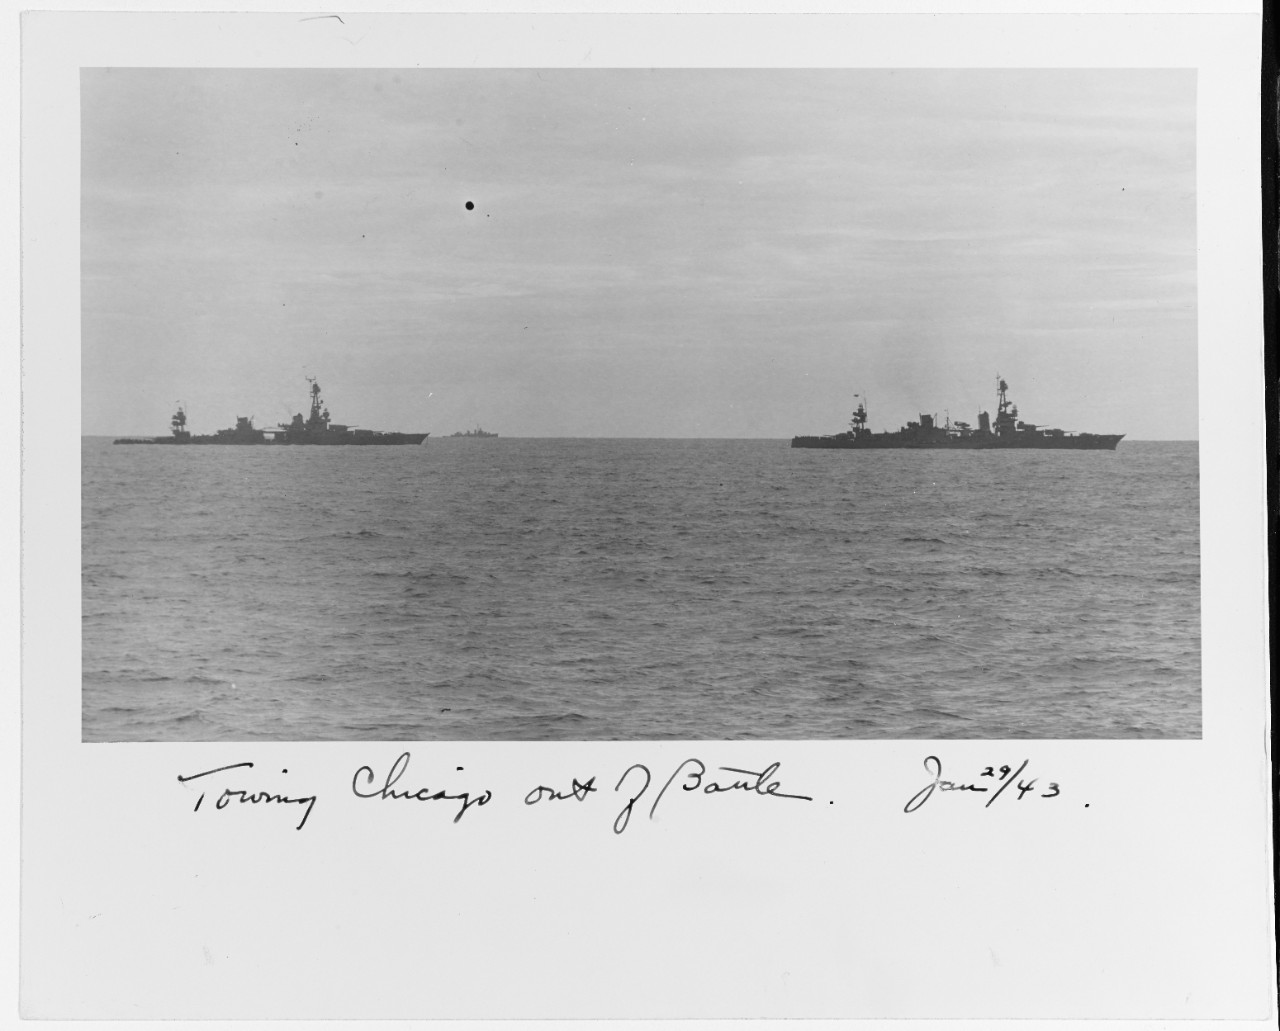 Chicago (left) slowly emerges from the battle under tow of Louisville on the morning of 30 January 1943. A tug, most likely Navajo (AT-64), steams alongside Louisville. (Collection of Vice Adm. Robert C. Giffen, Naval History and Heritage Command...